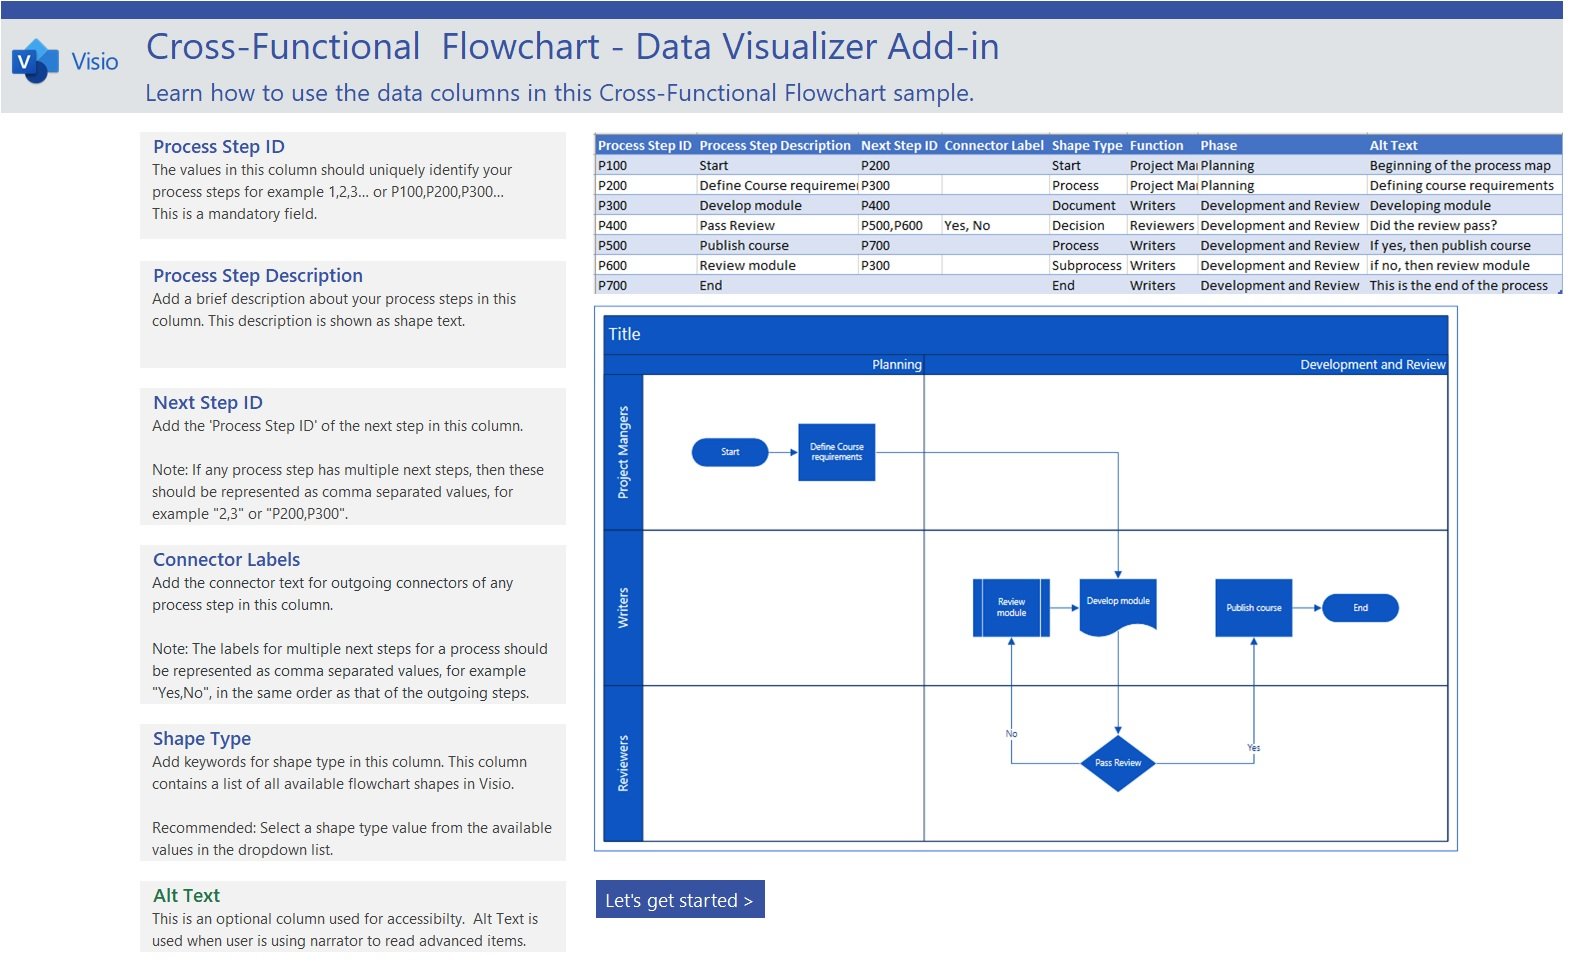 Cross-Functional Flowchart from Data Template In Excel (Download.xlsx)